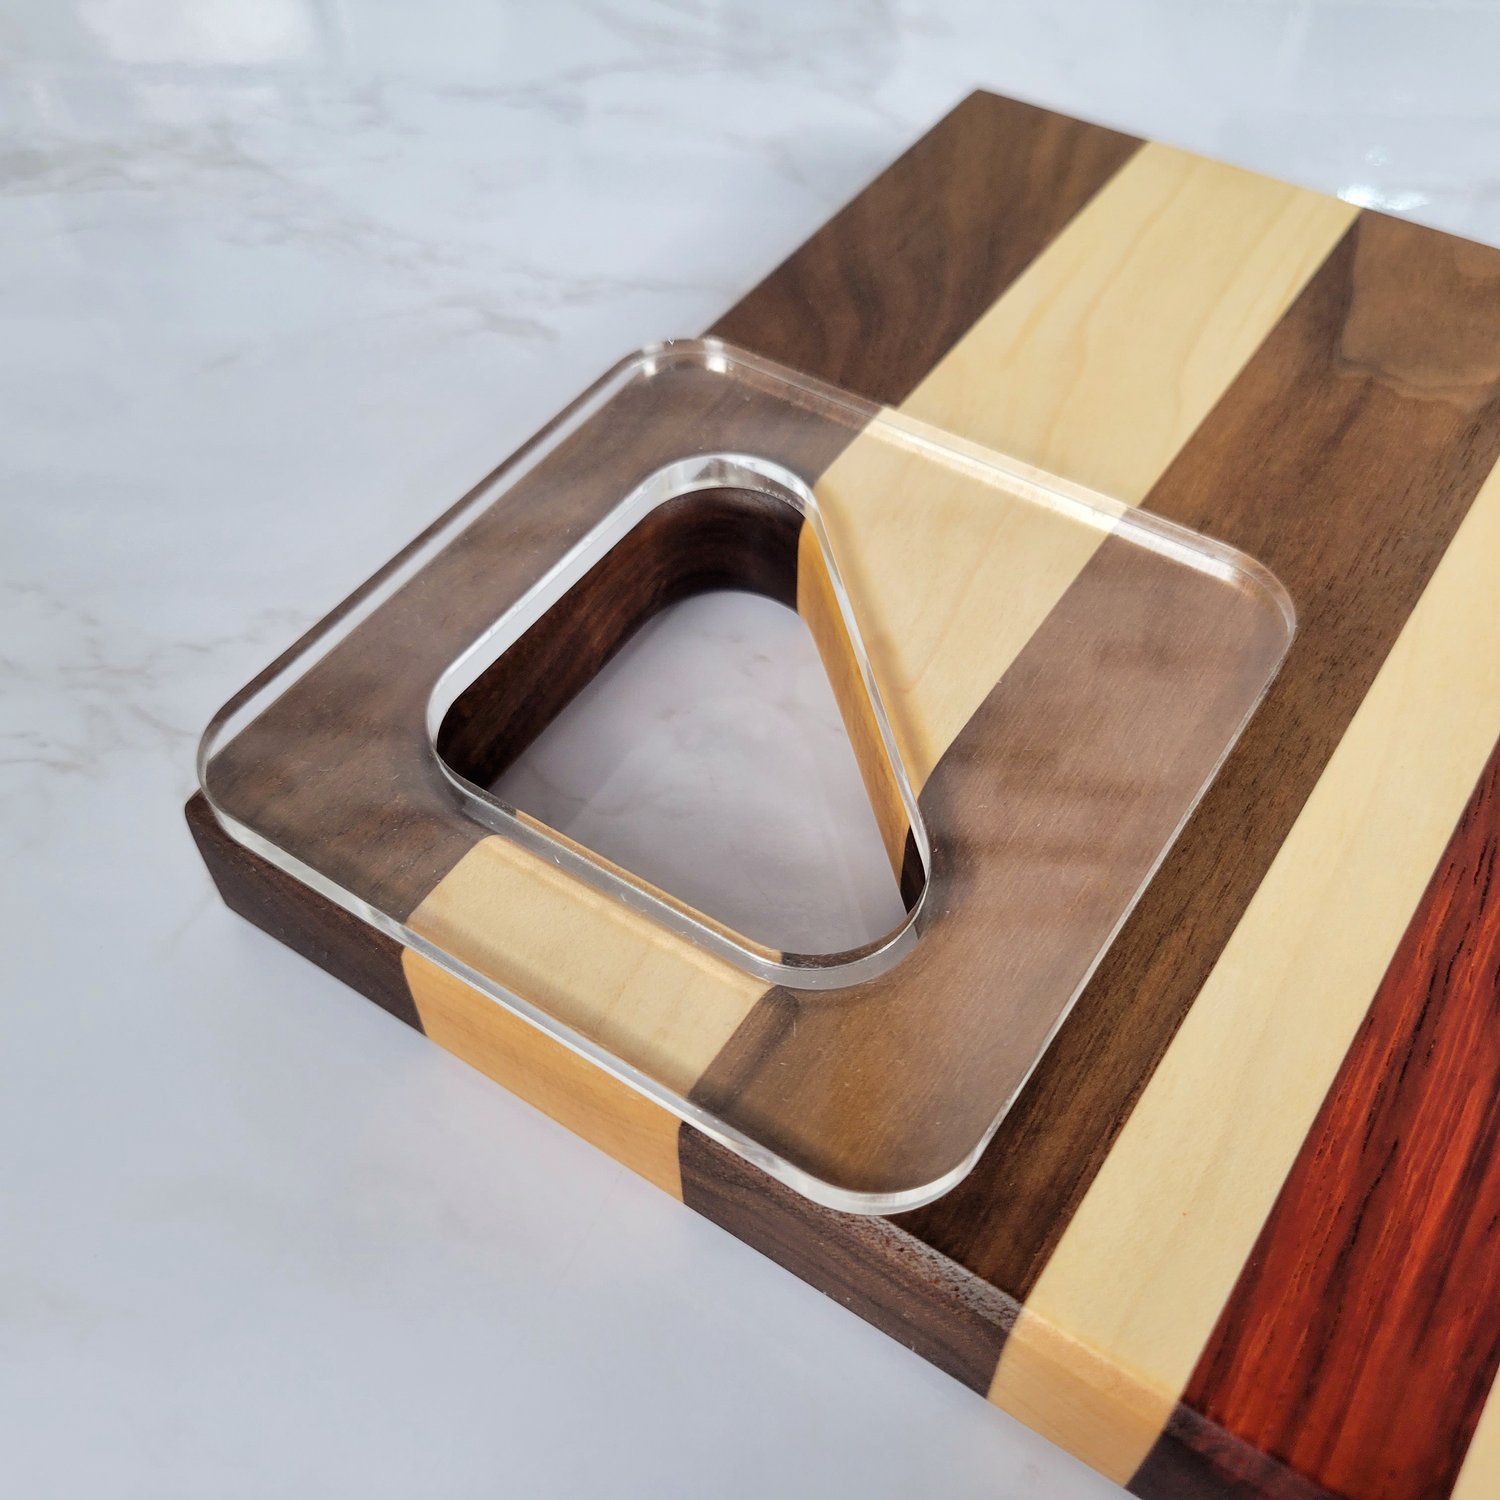 triangle-cutting-board-corner-handle-acrylic-router-template-wood